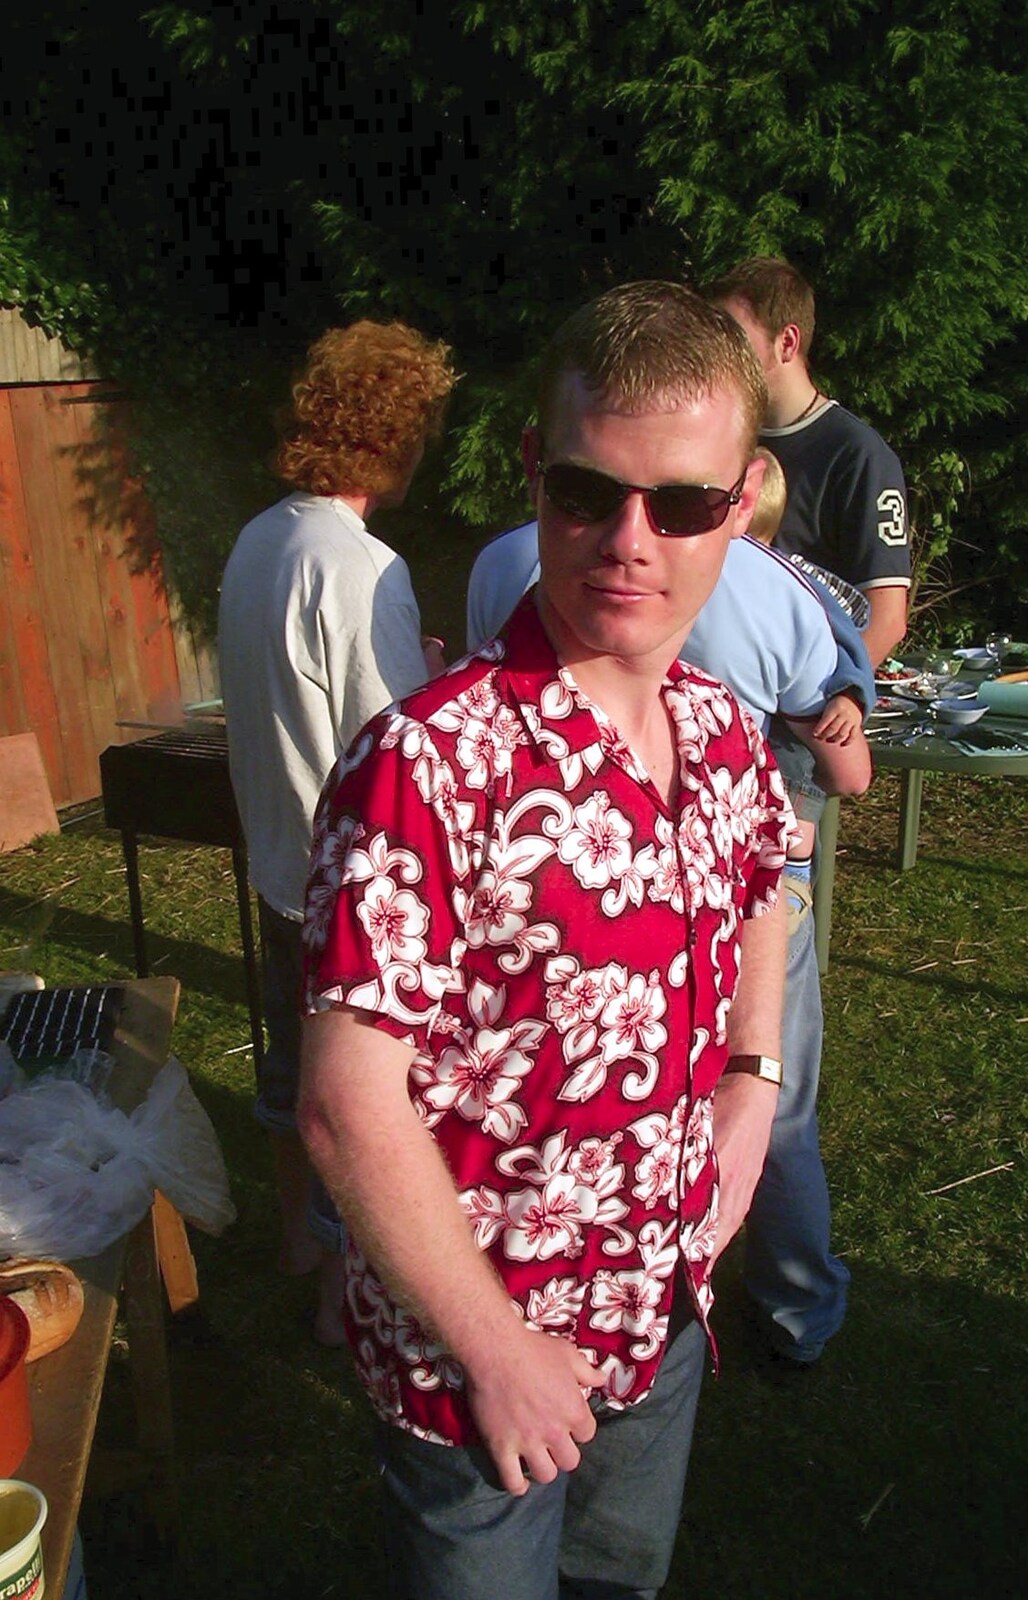 Mikey P appears, with a loud shirt from DH's BSCC Barbeque, The Old Post Office, Brome, Suffolk - 7th July 2002